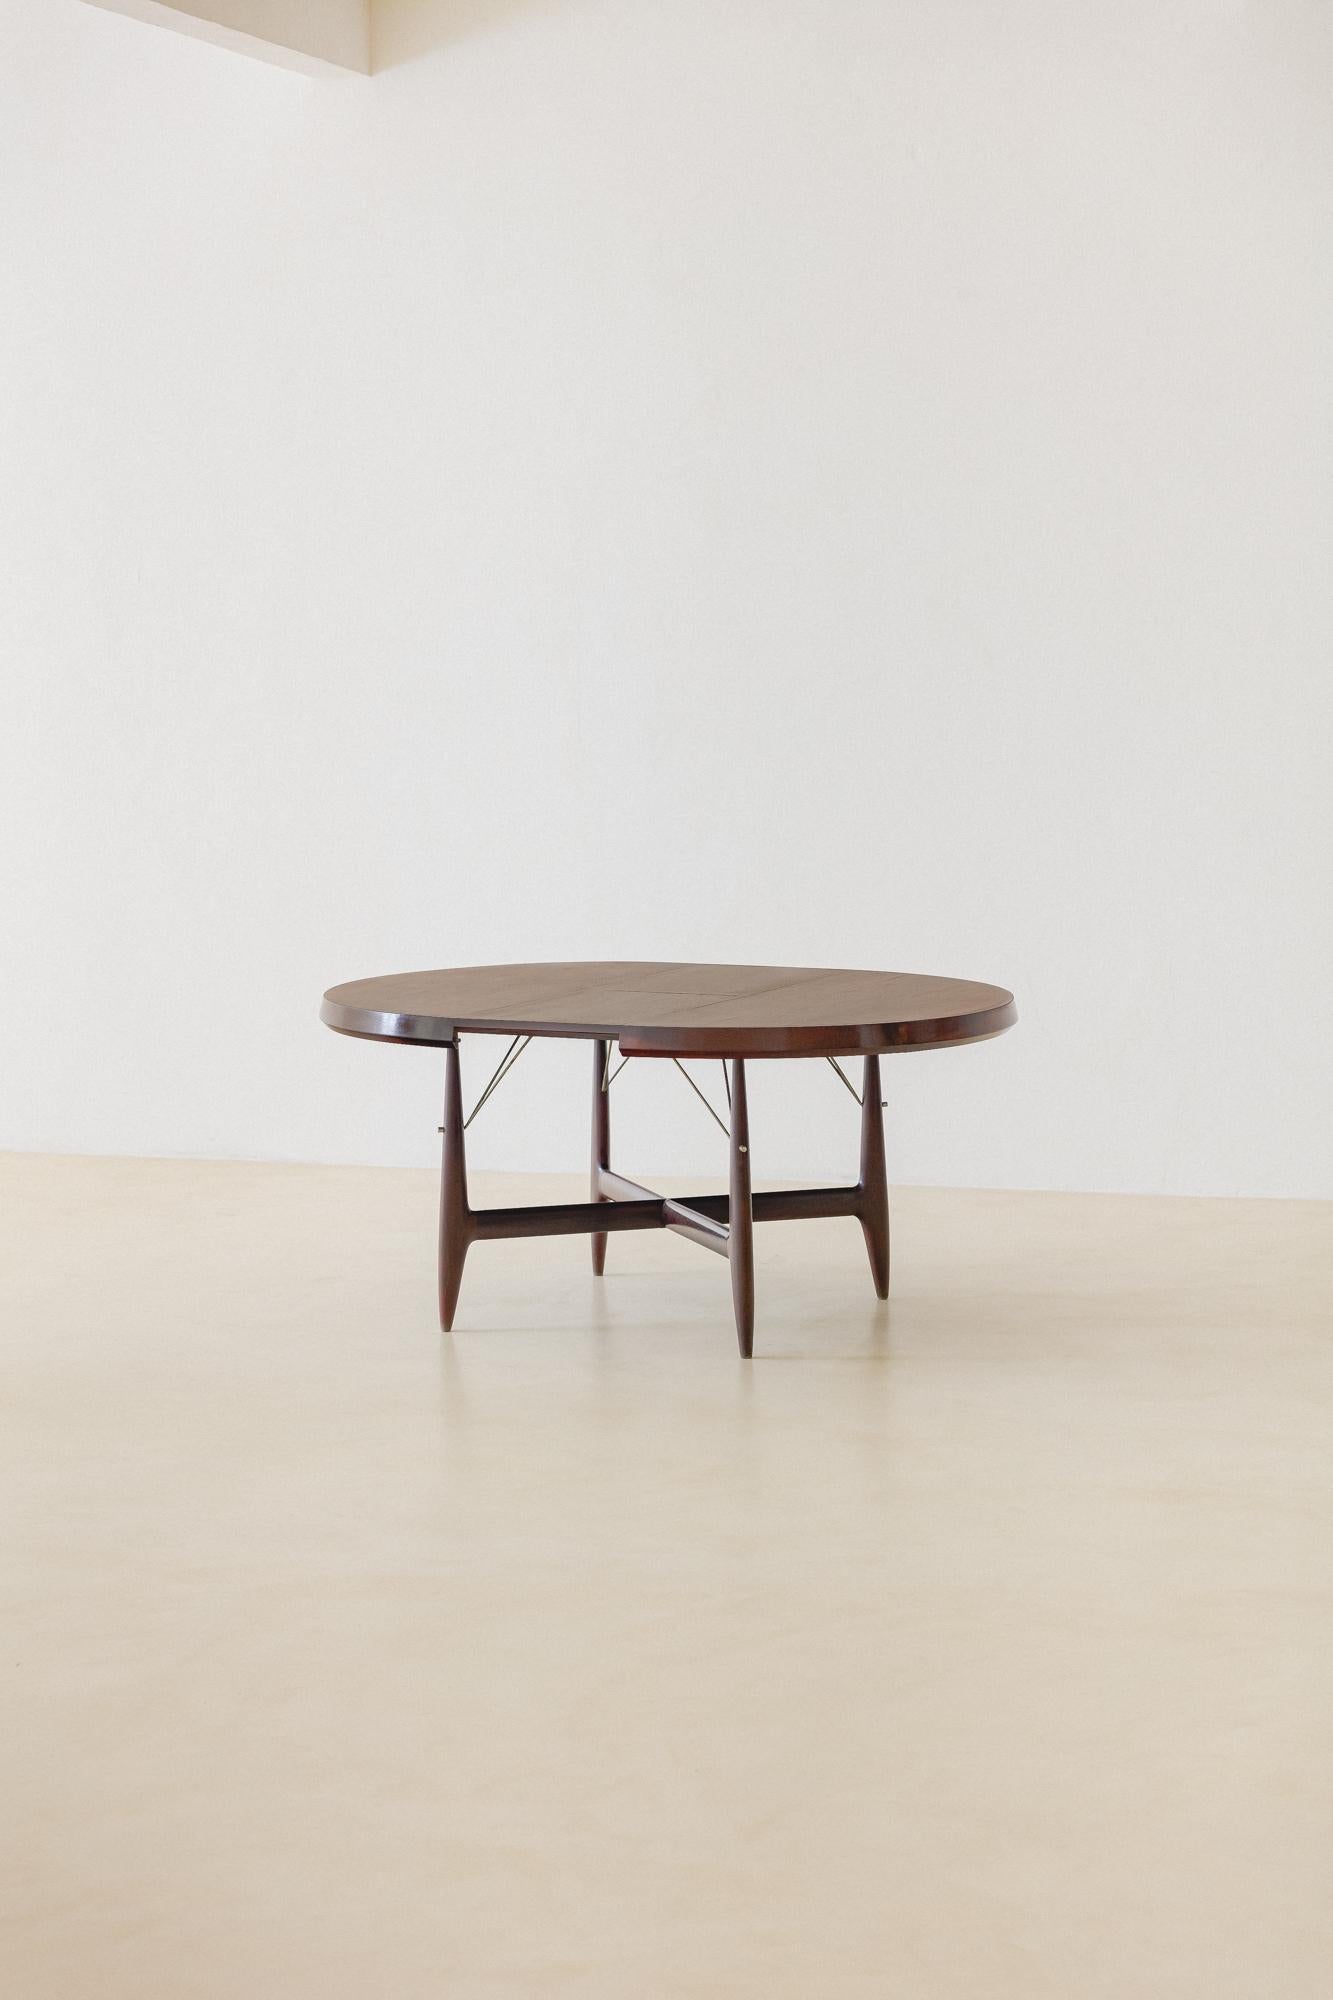 Mid-20th Century Stella Round Expandable Table by Sergio Rodrigues, Brazilian Midcentury Design For Sale